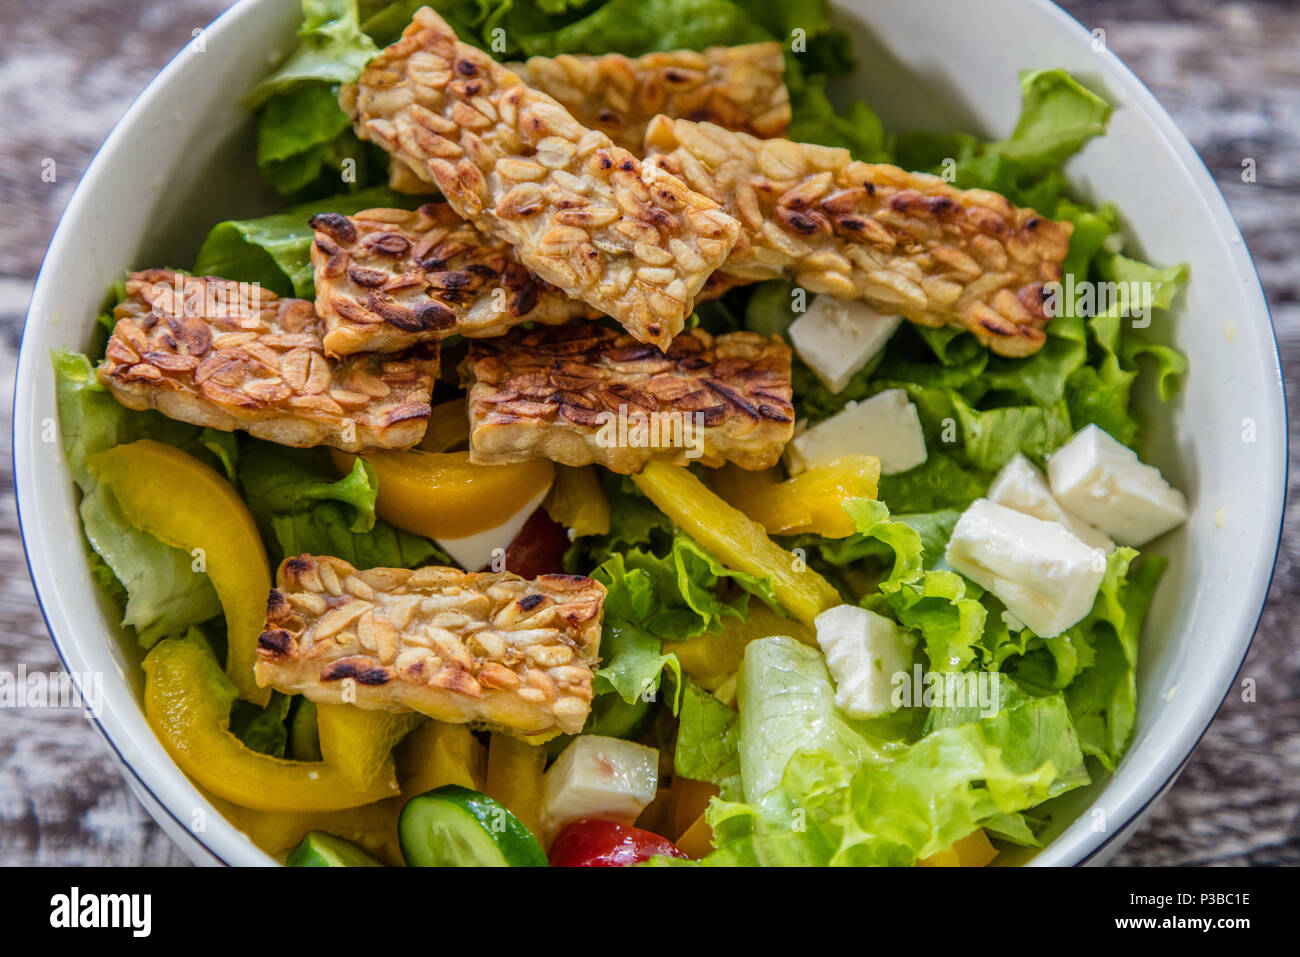 Raw vegetable and lettuce salad with organic lettuce, capsicum, tomato, cucumber, feta cheese and tempe goreng - fried tempeh. Bali Island, Indonesia Stock Photo